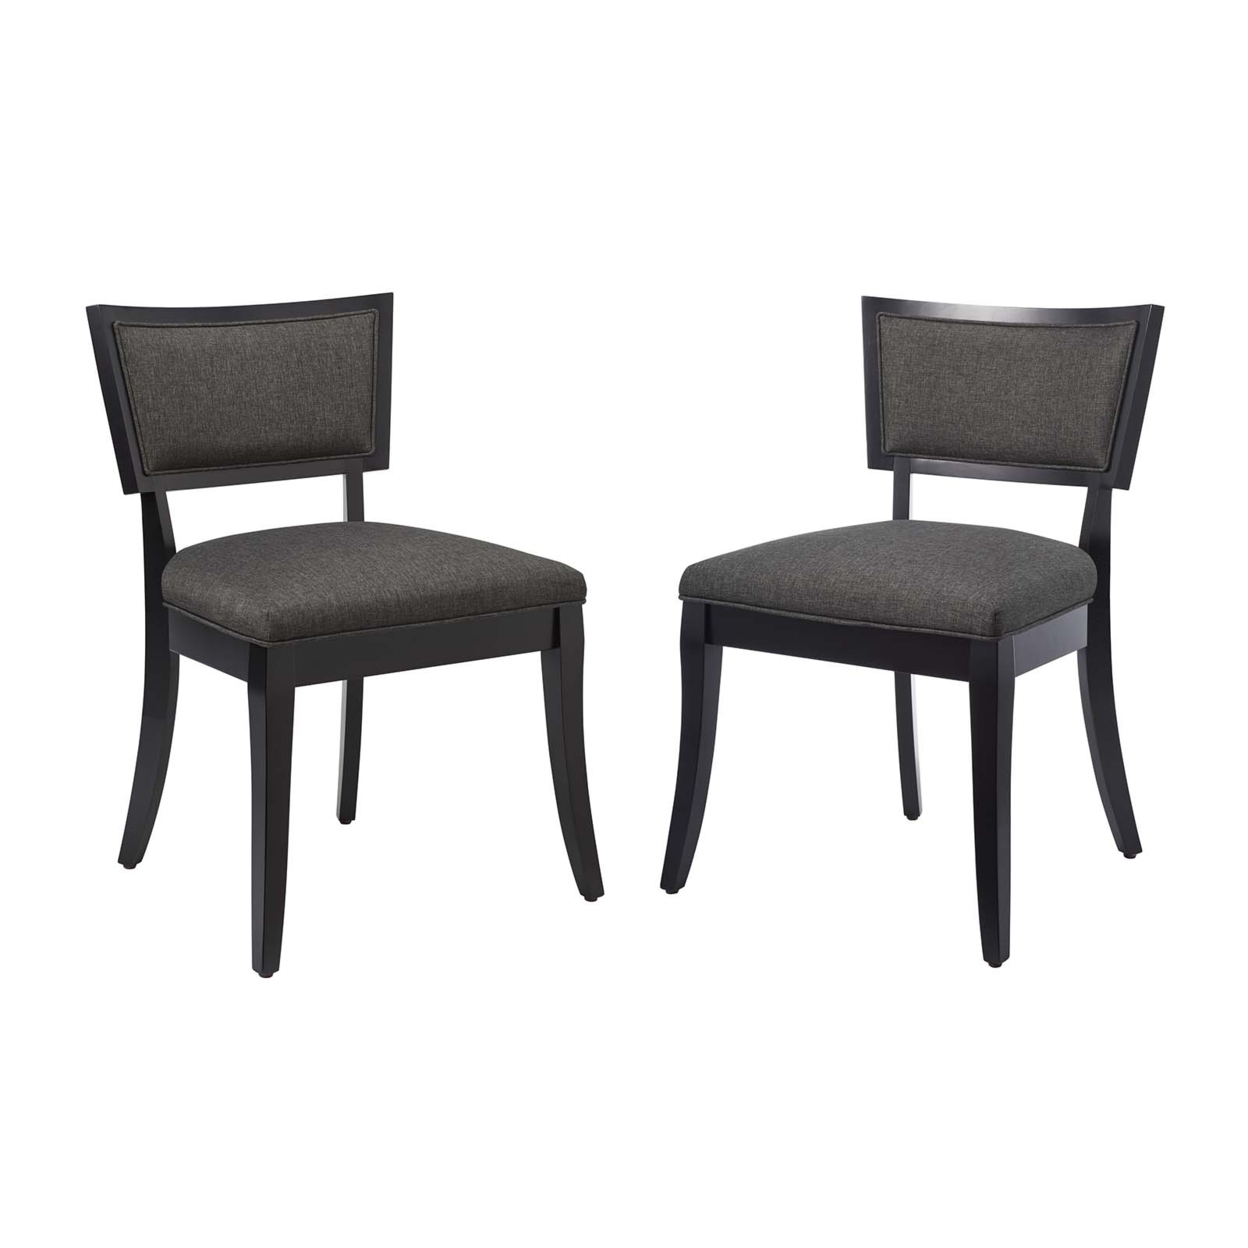 Pristine Upholstered Fabric Dining Chairs - Set Of 2, Gray